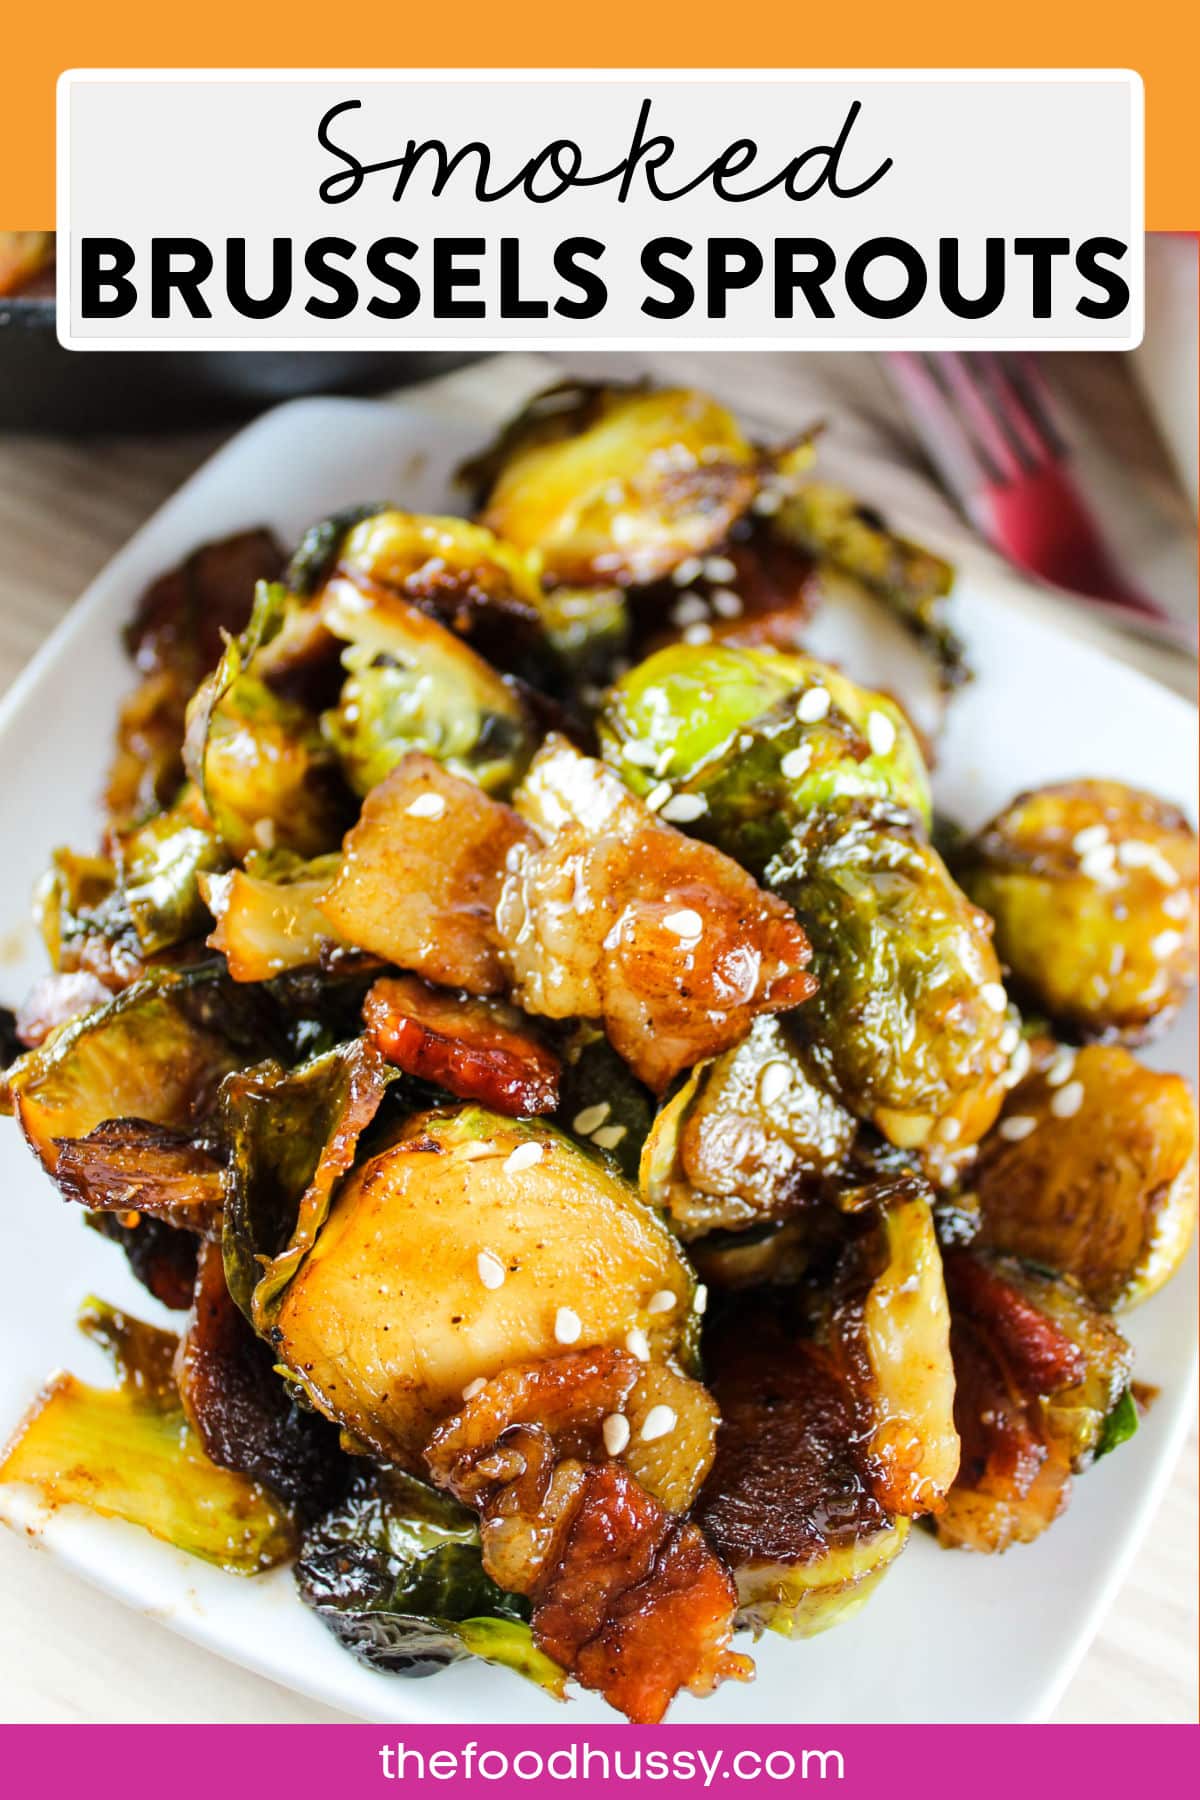 These Traeger Smoked Brussels Sprouts will be your new favorite vegetable side dish. Sauteed with diced bacon and tossed in a maple syrup sauce - nobody will be able to resist these caramelized bites of deliciousness! via @foodhussy